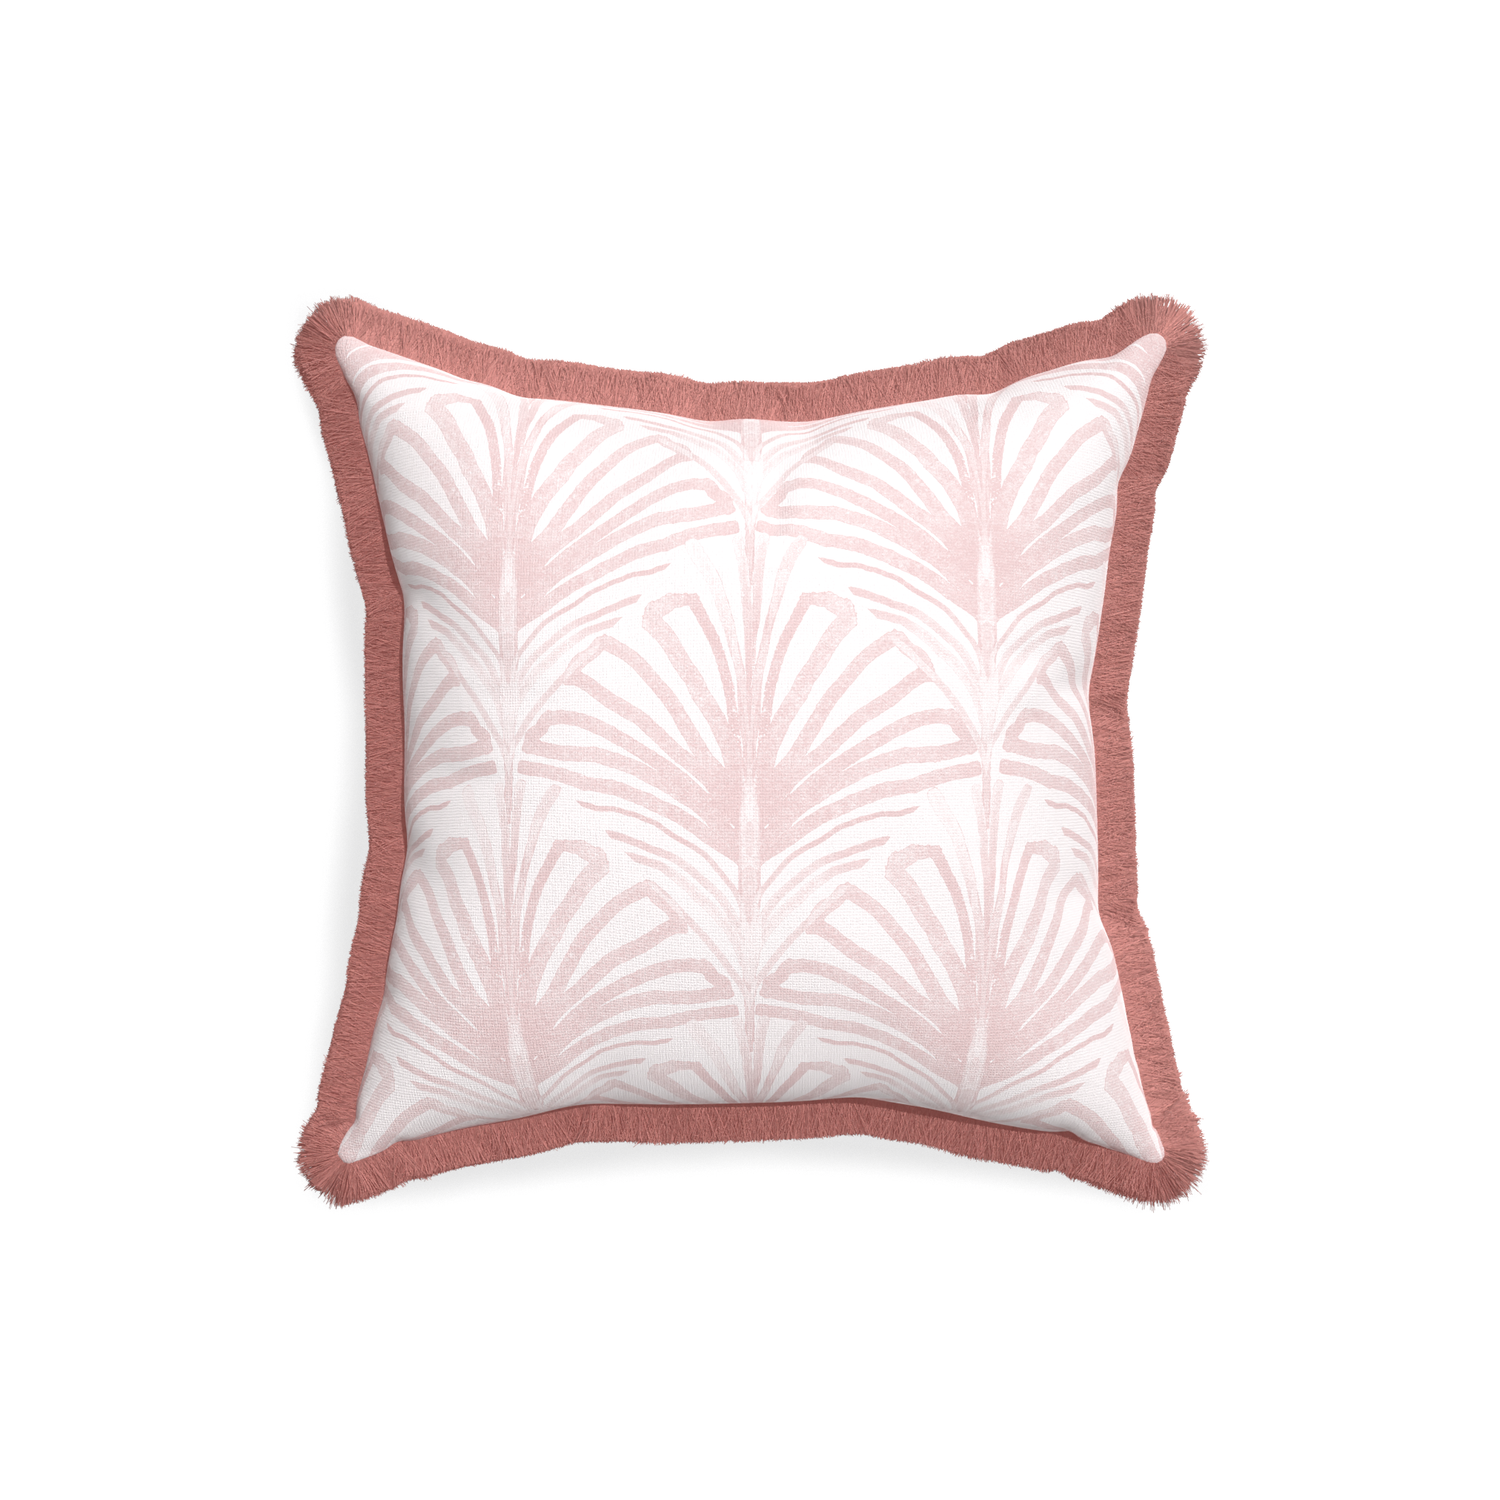 18-square suzy rose custom pillow with d fringe on white background